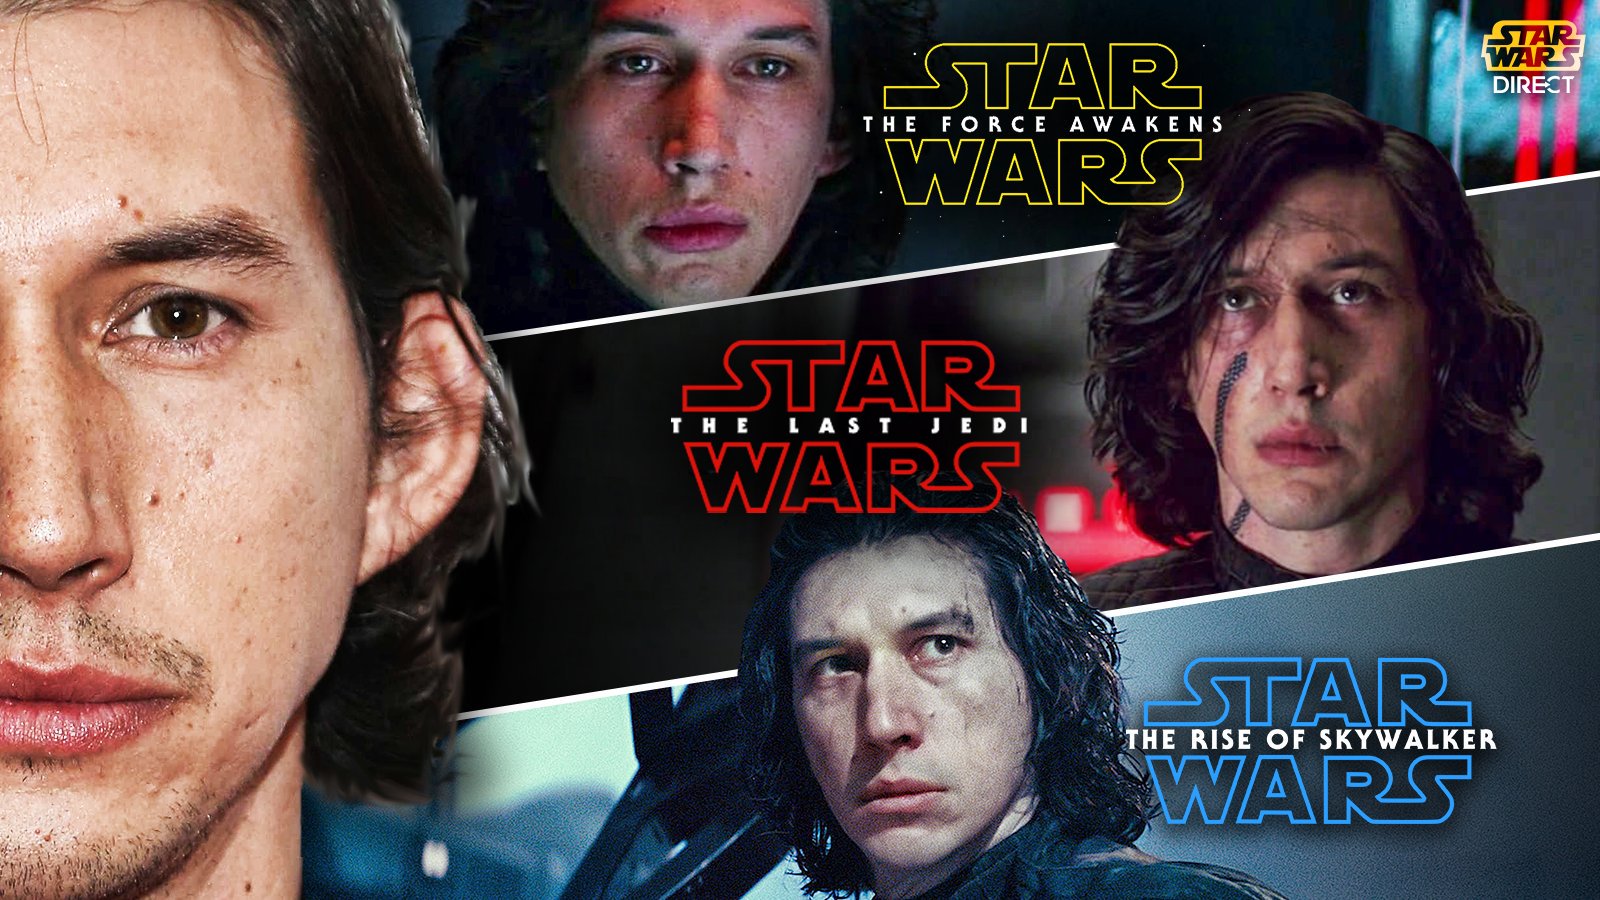 Wish a very happy birthday to Kylo Ren himself, actor Adam Driver, as he turns 36 years old today! 